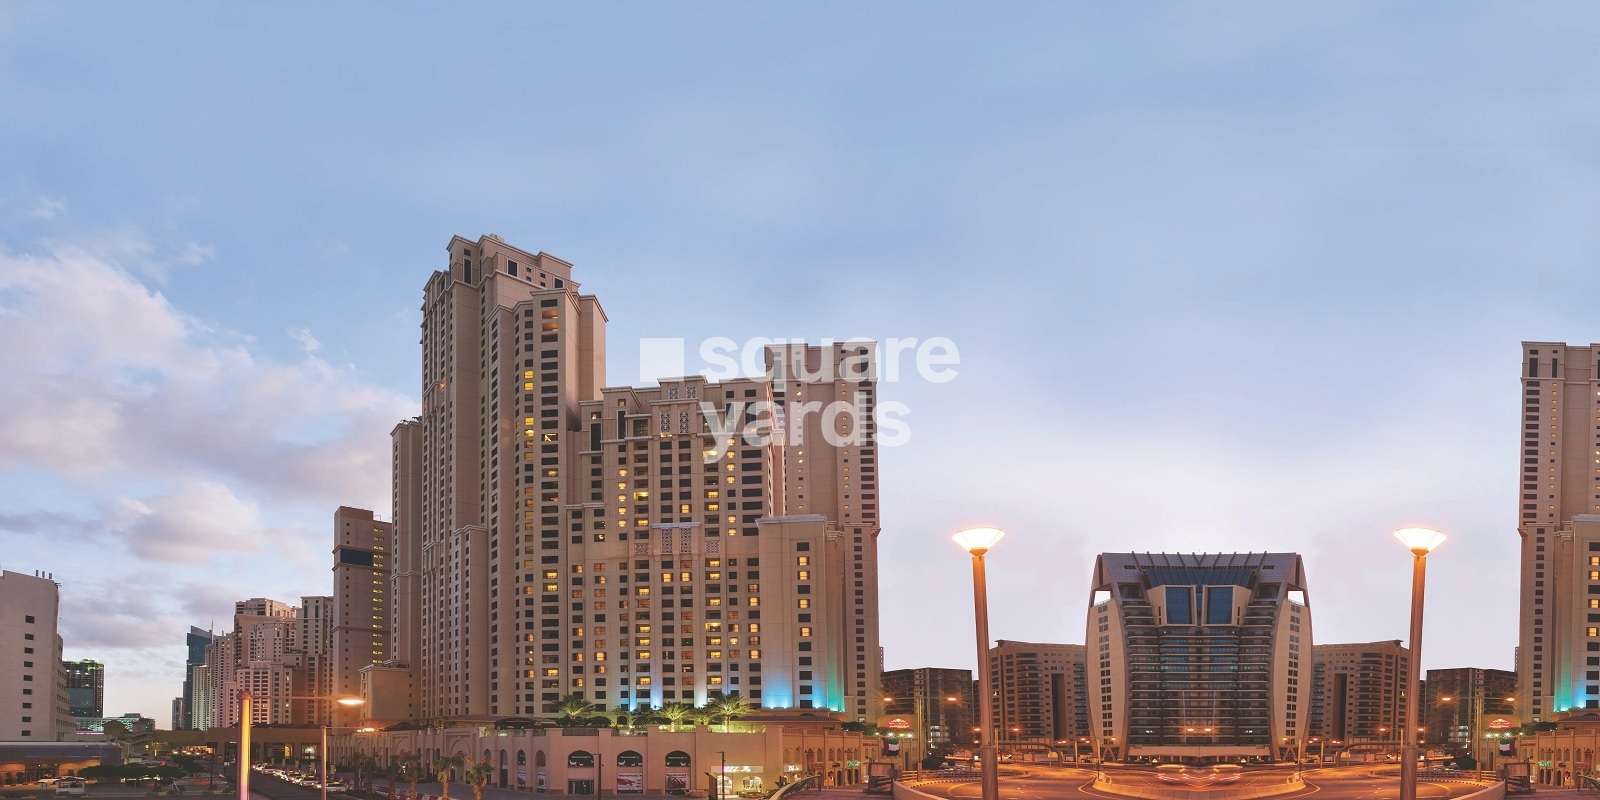 Ramada Hotel And Suites Cover Image